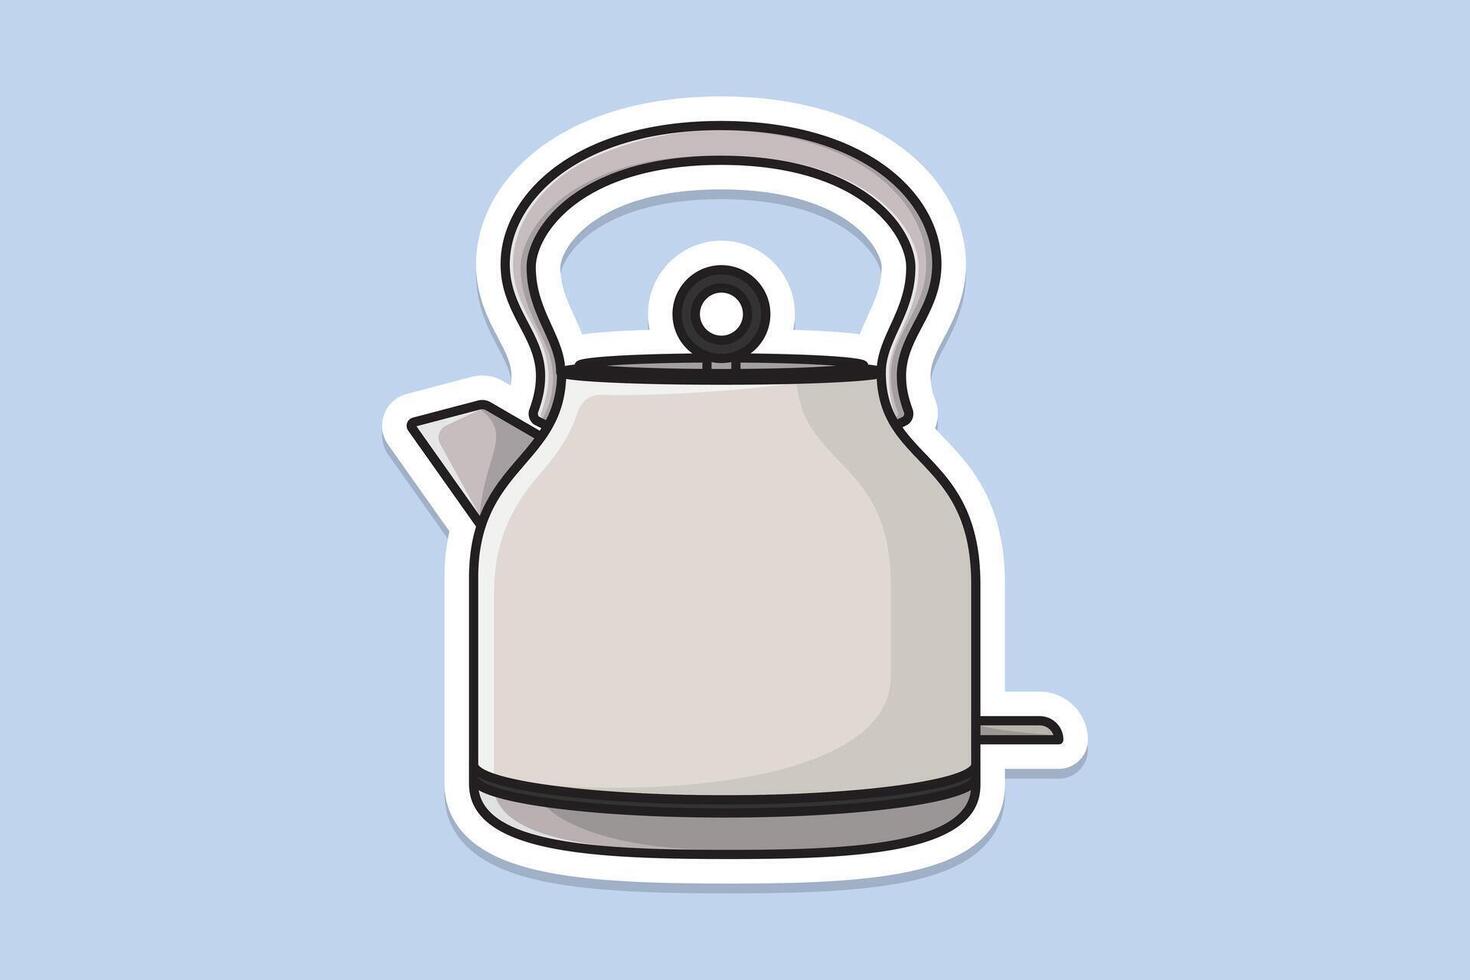 Beautiful White Tea Kettle sticker design vector illustration. Kitchen interior object icon concept. Morning Tea Teapot with closed lid sticker design with shadow.